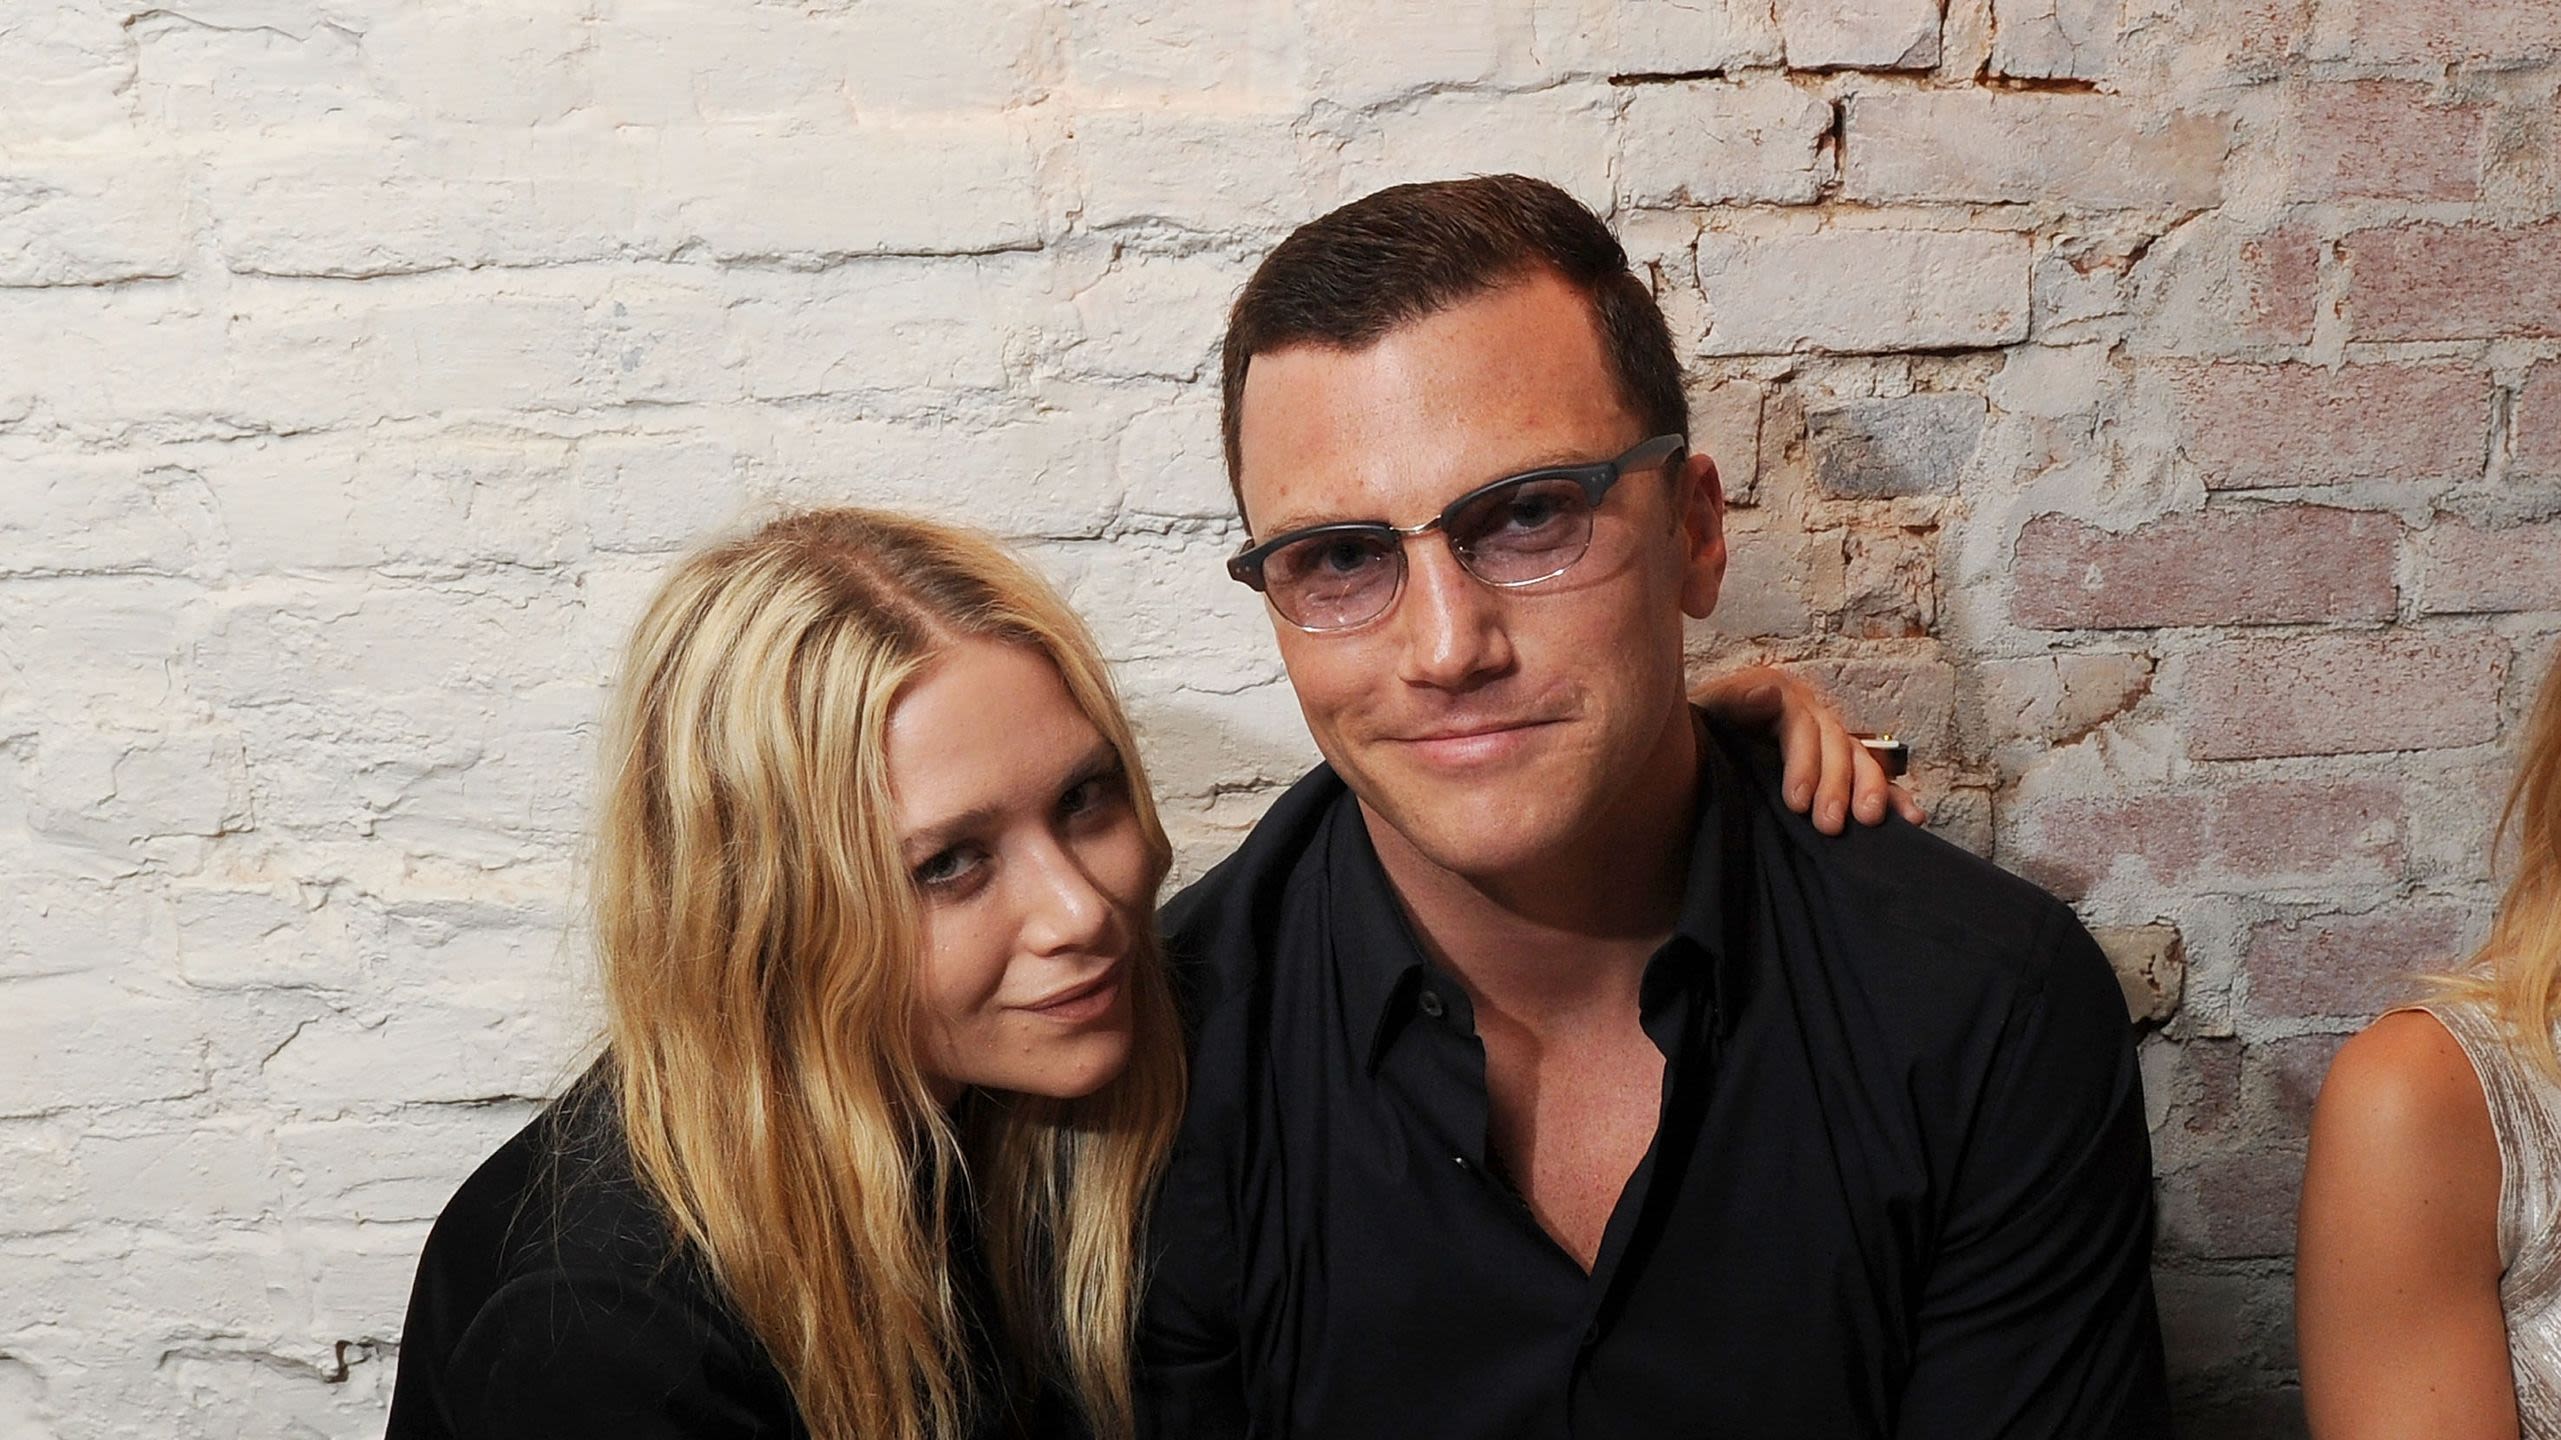 Mary-Kate Olsen and Sean Avery Are Reportedly ‘Just Friends’ Despite Dating Rumors